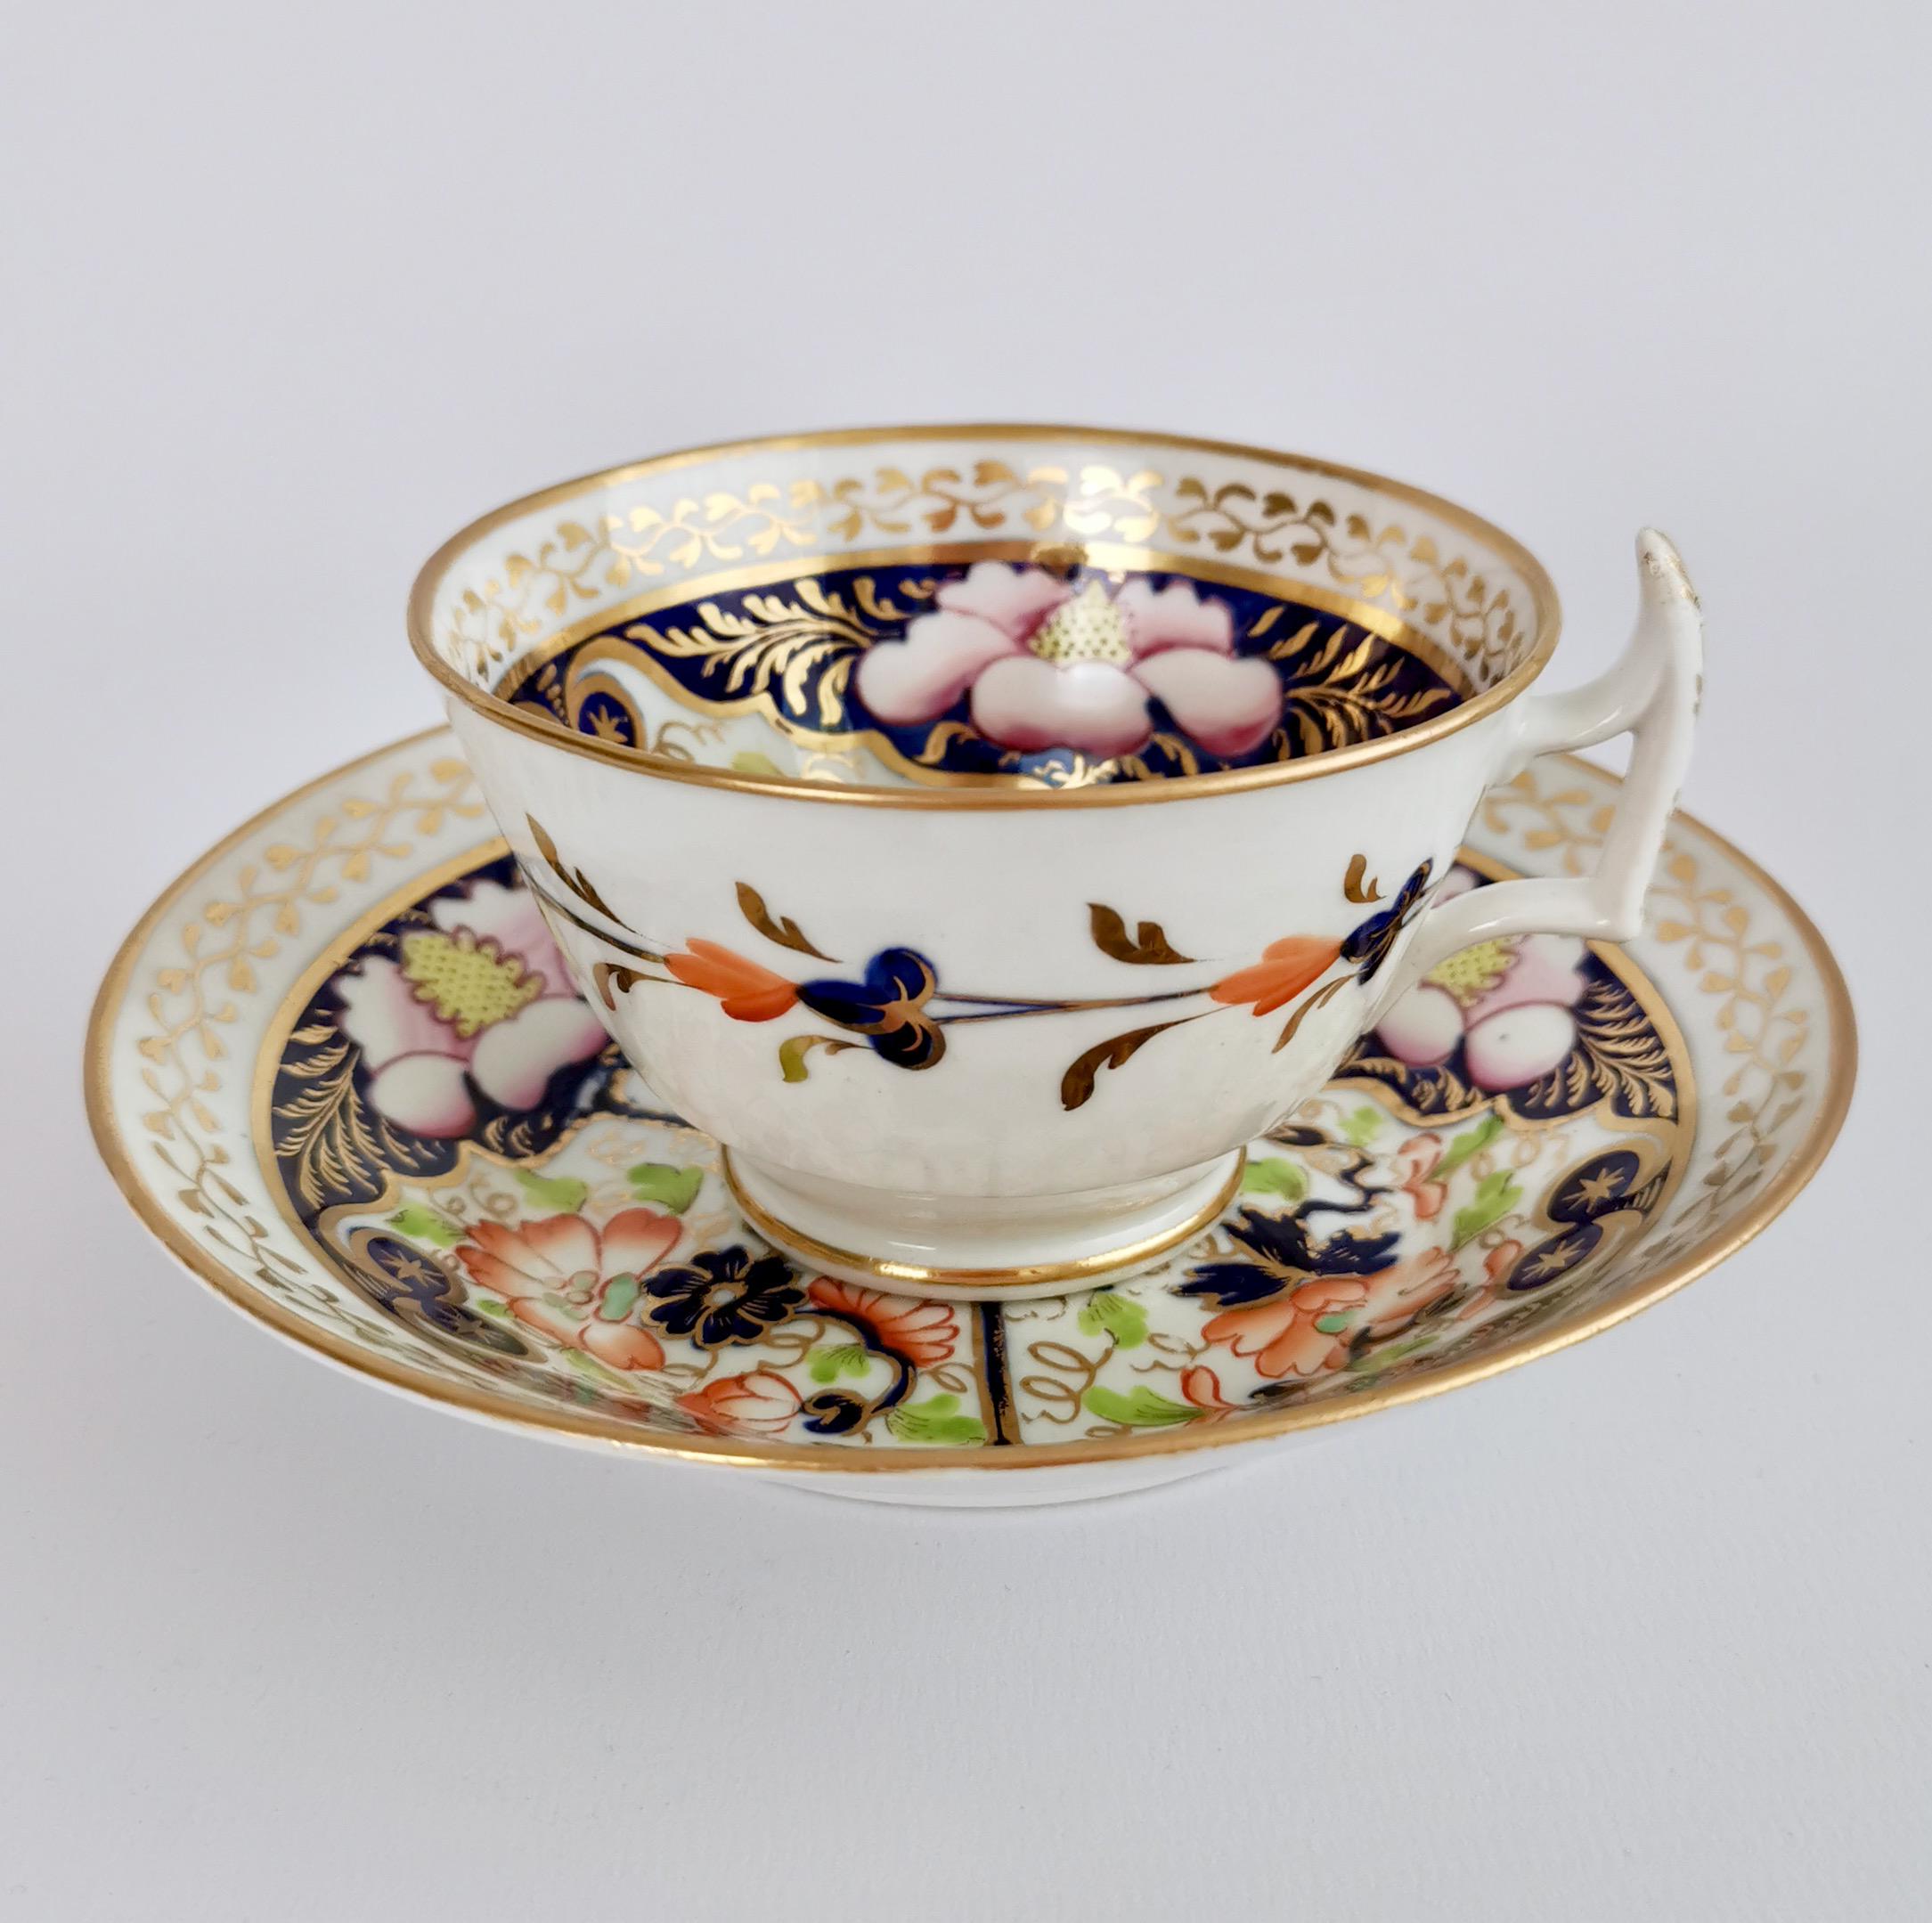 This is a beautful teacup and saucer made by New Hall around 1816, which was known as the Regency era. The set is decorated with a very striking pattern in the Imari style, but what is special about this is that it doesn't follow the usual I Imari